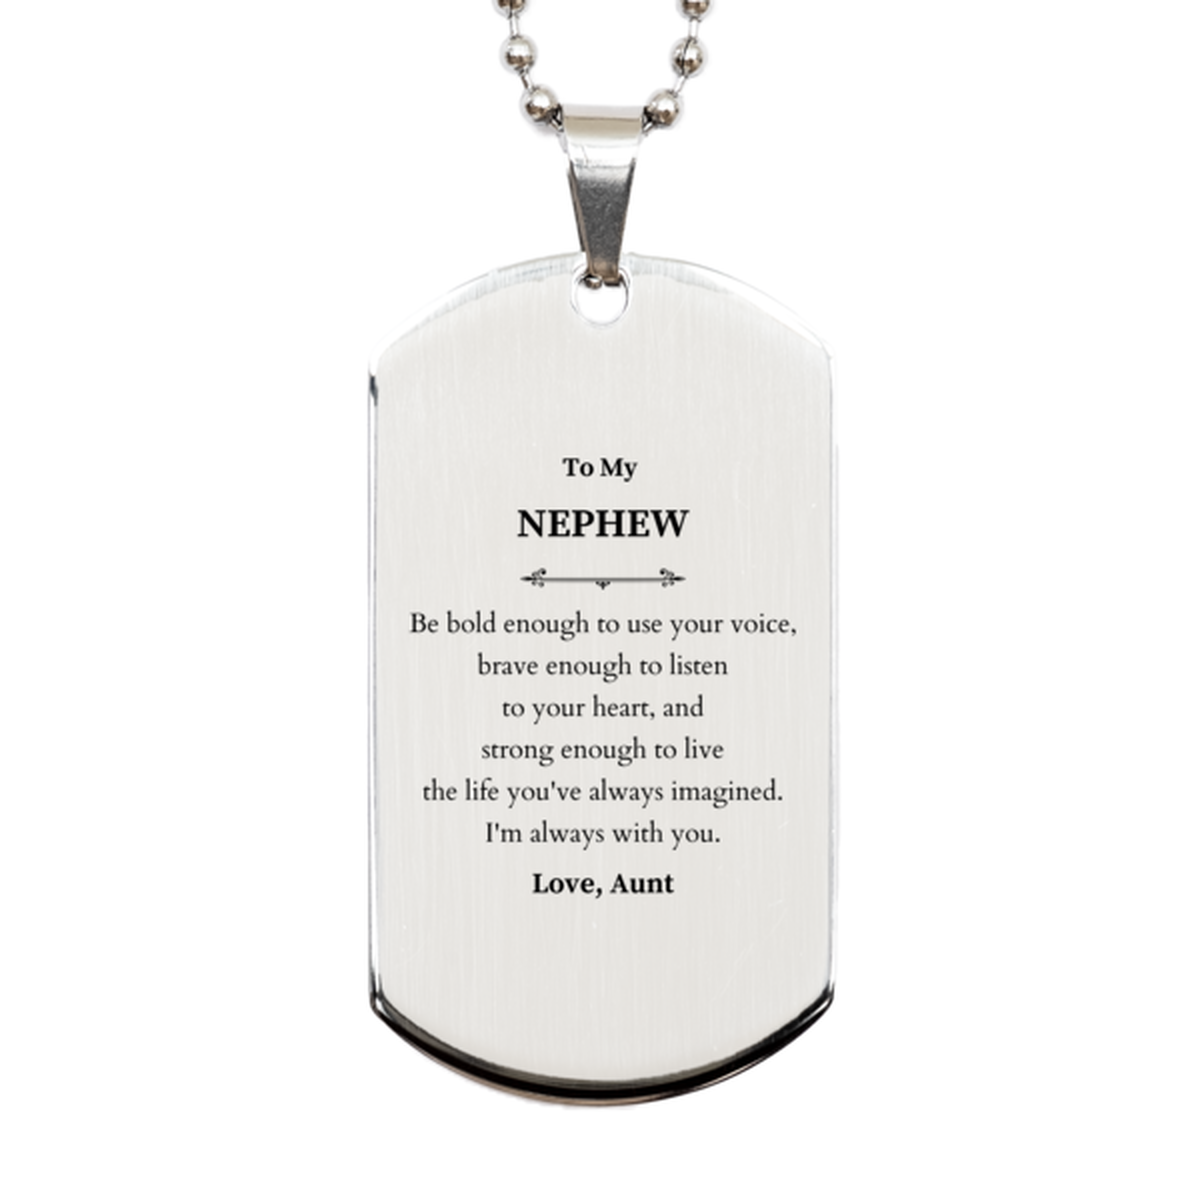 Keepsake Nephew Silver Dog Tag Gift Idea Graduation Christmas Birthday Nephew from Aunt, Nephew Be bold enough to use your voice, brave enough to listen to your heart. Love, Aunt